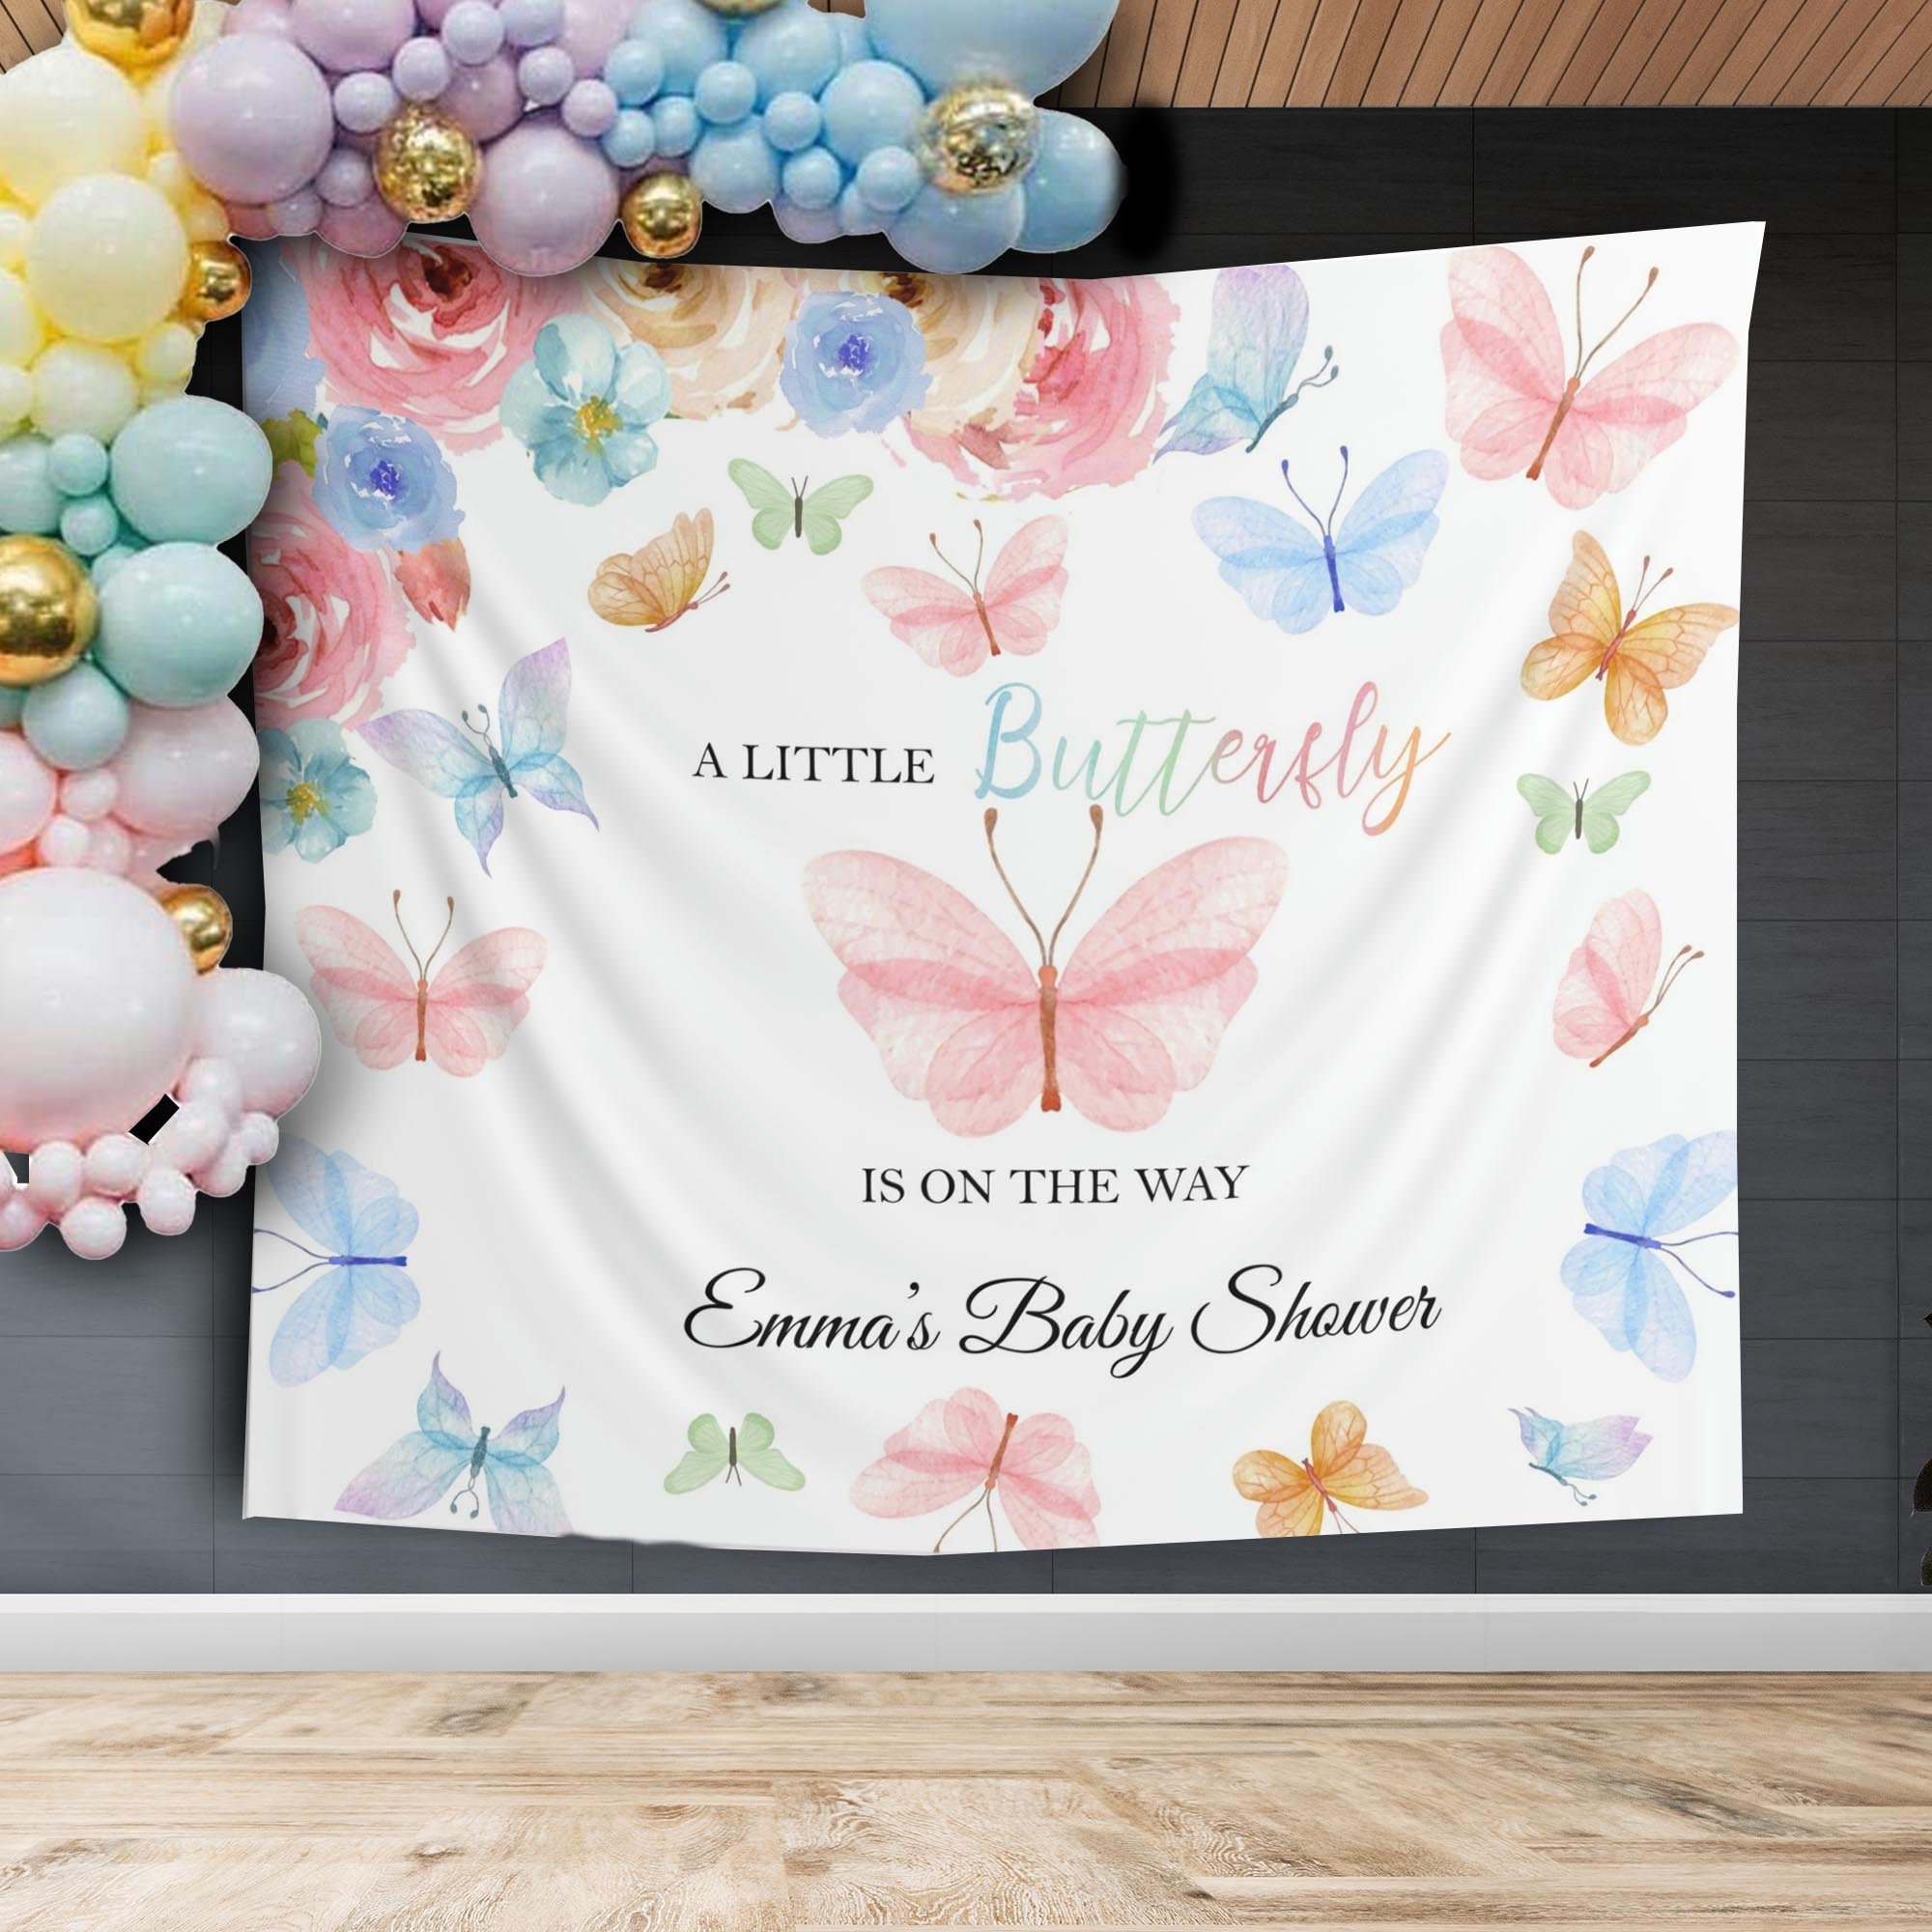 Girl Baby Shower Decor Custom Floral Backdrop Photo Booth 